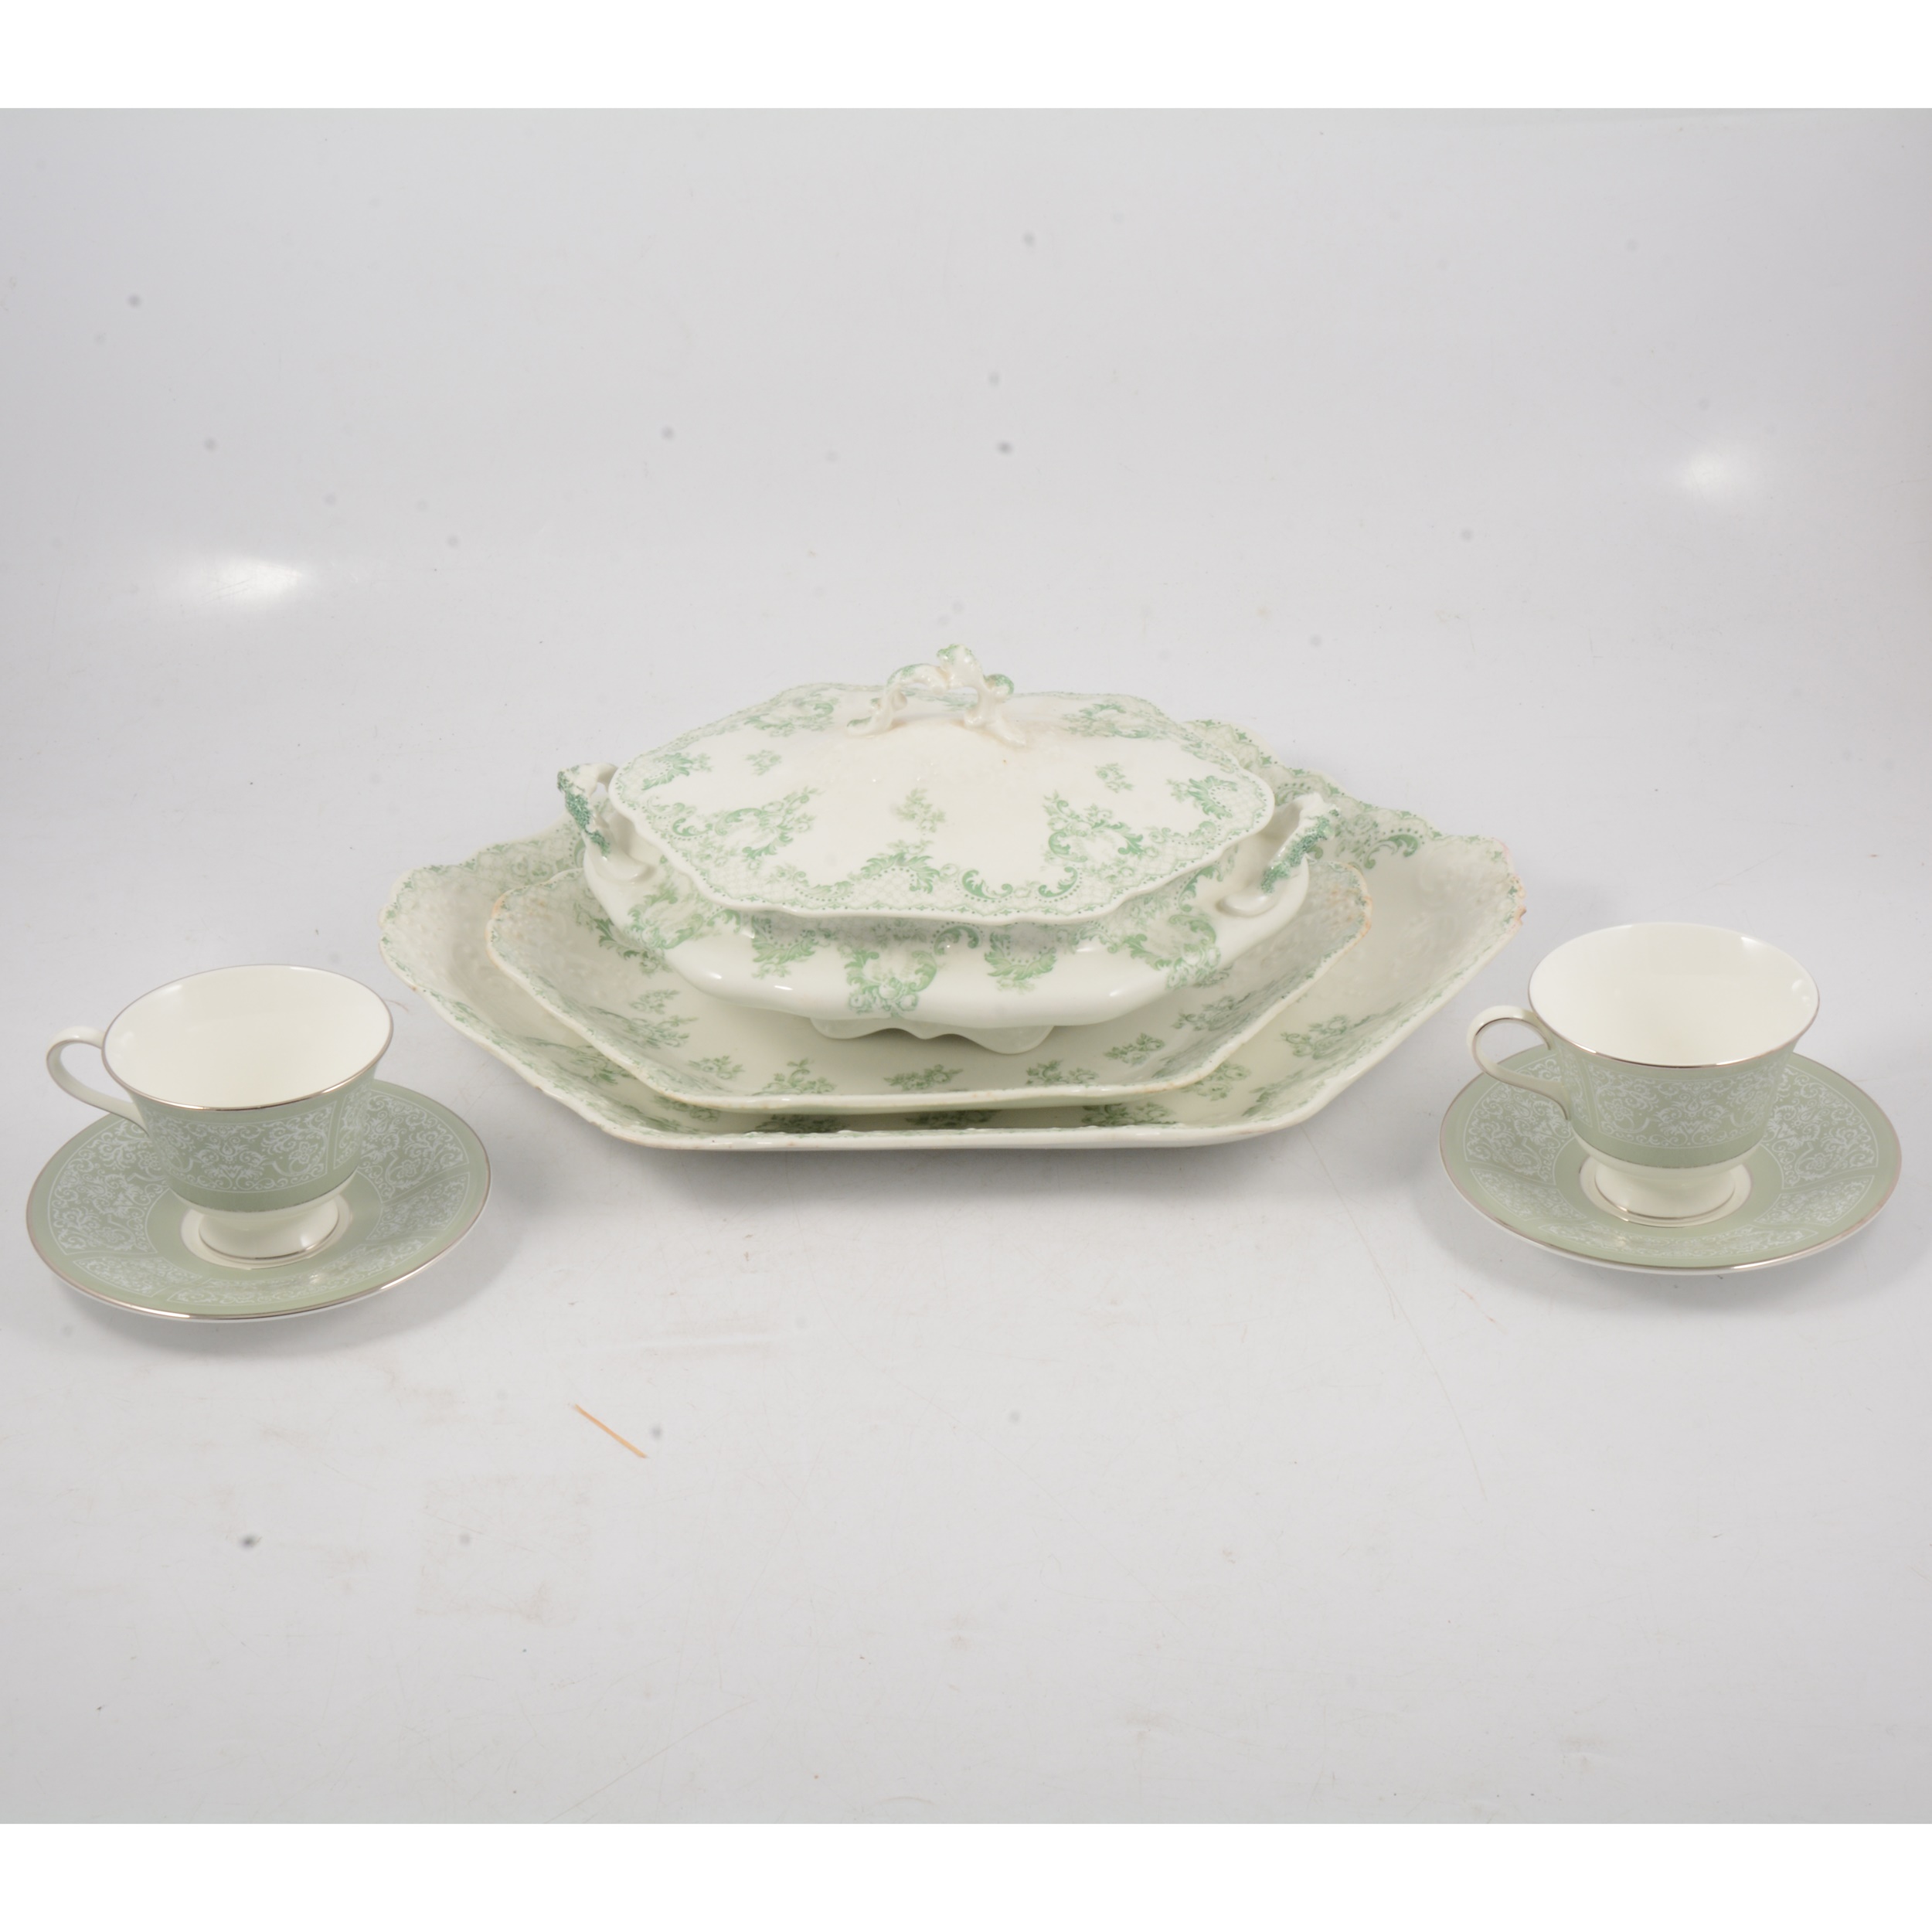 Johnson Brothers green and white transfer printed ware.